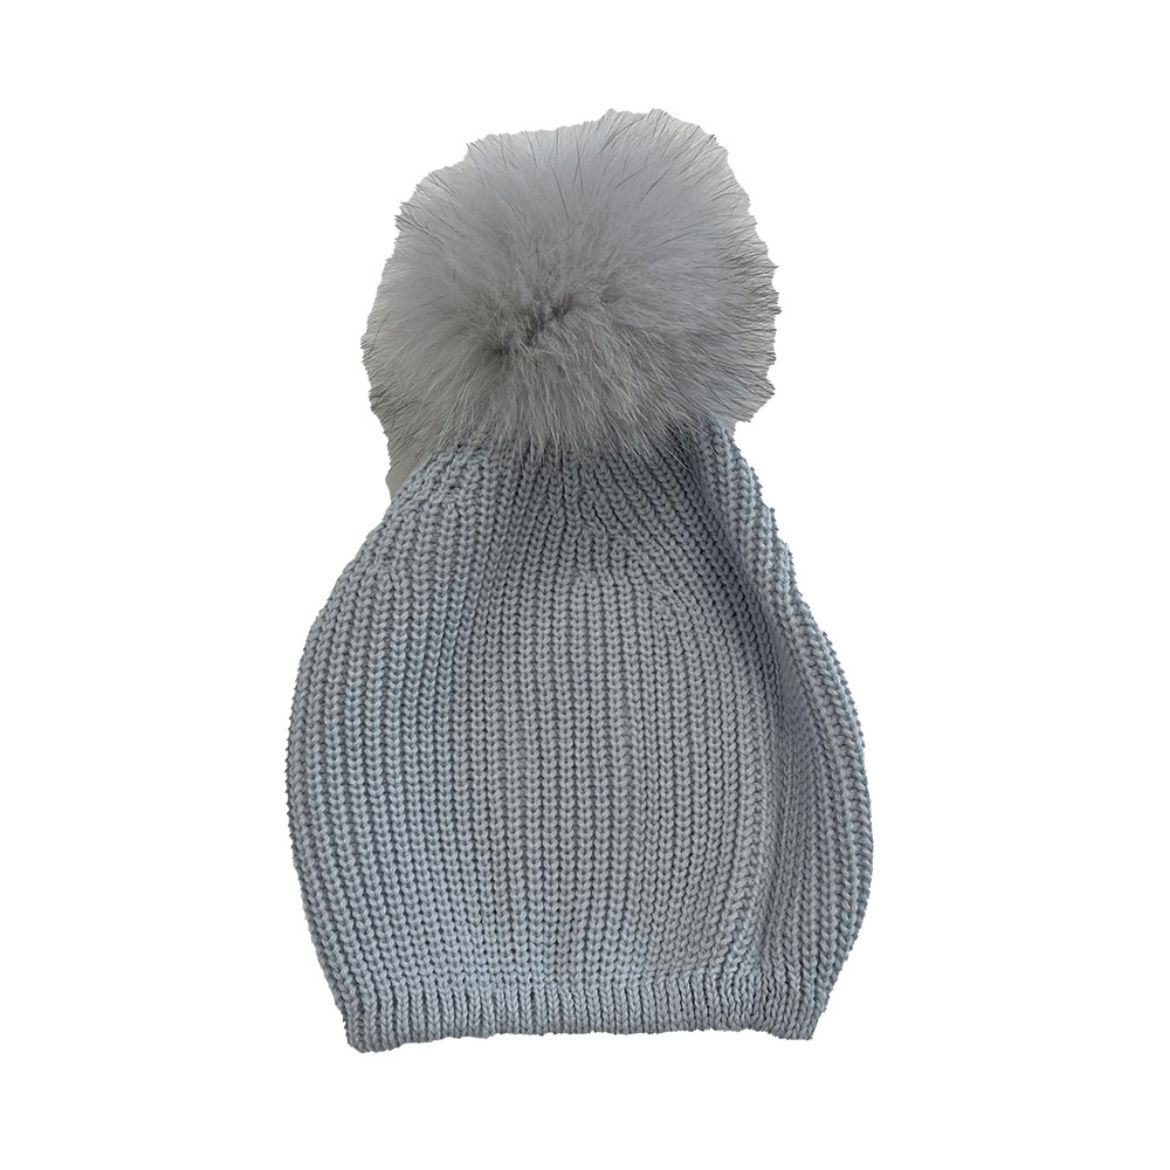 Picture of Granlei Grey Hat with Fur Pom Pom